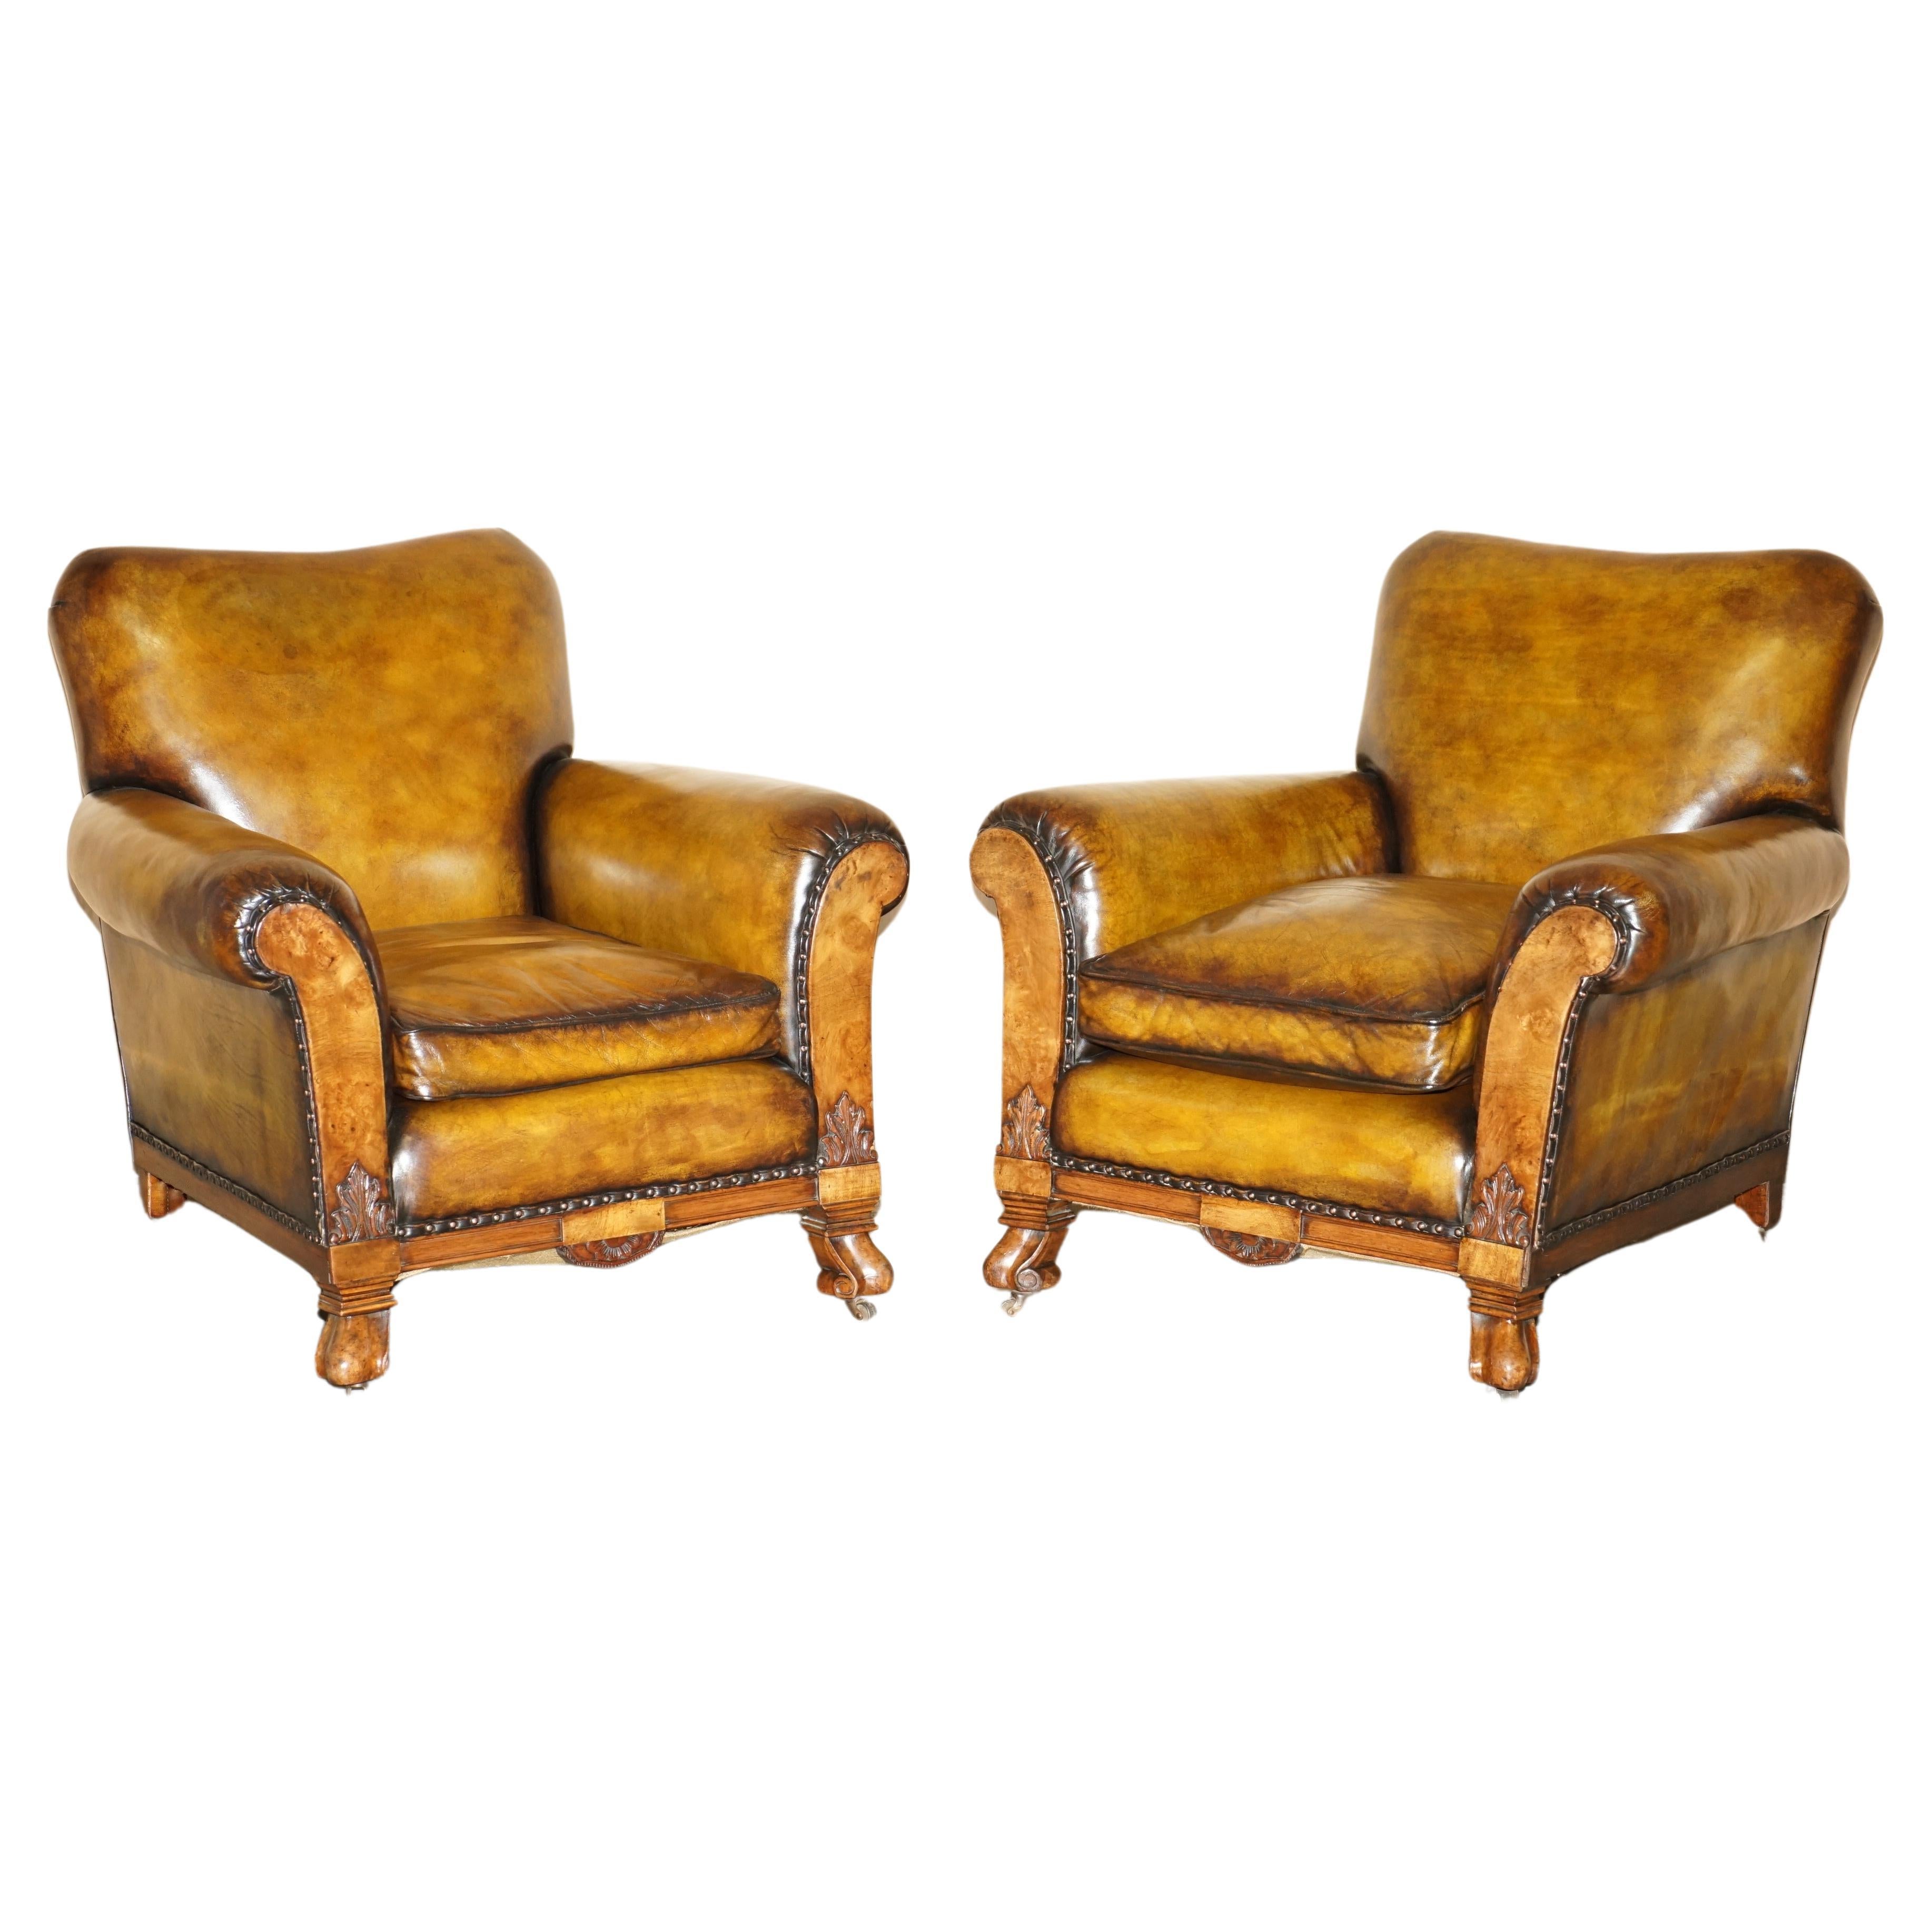 FINE & IMPORTANT PAIR OF ANTiQUE HAND CARVED BURR WALNUT BROWN LEATHER ARMCHAIRS For Sale